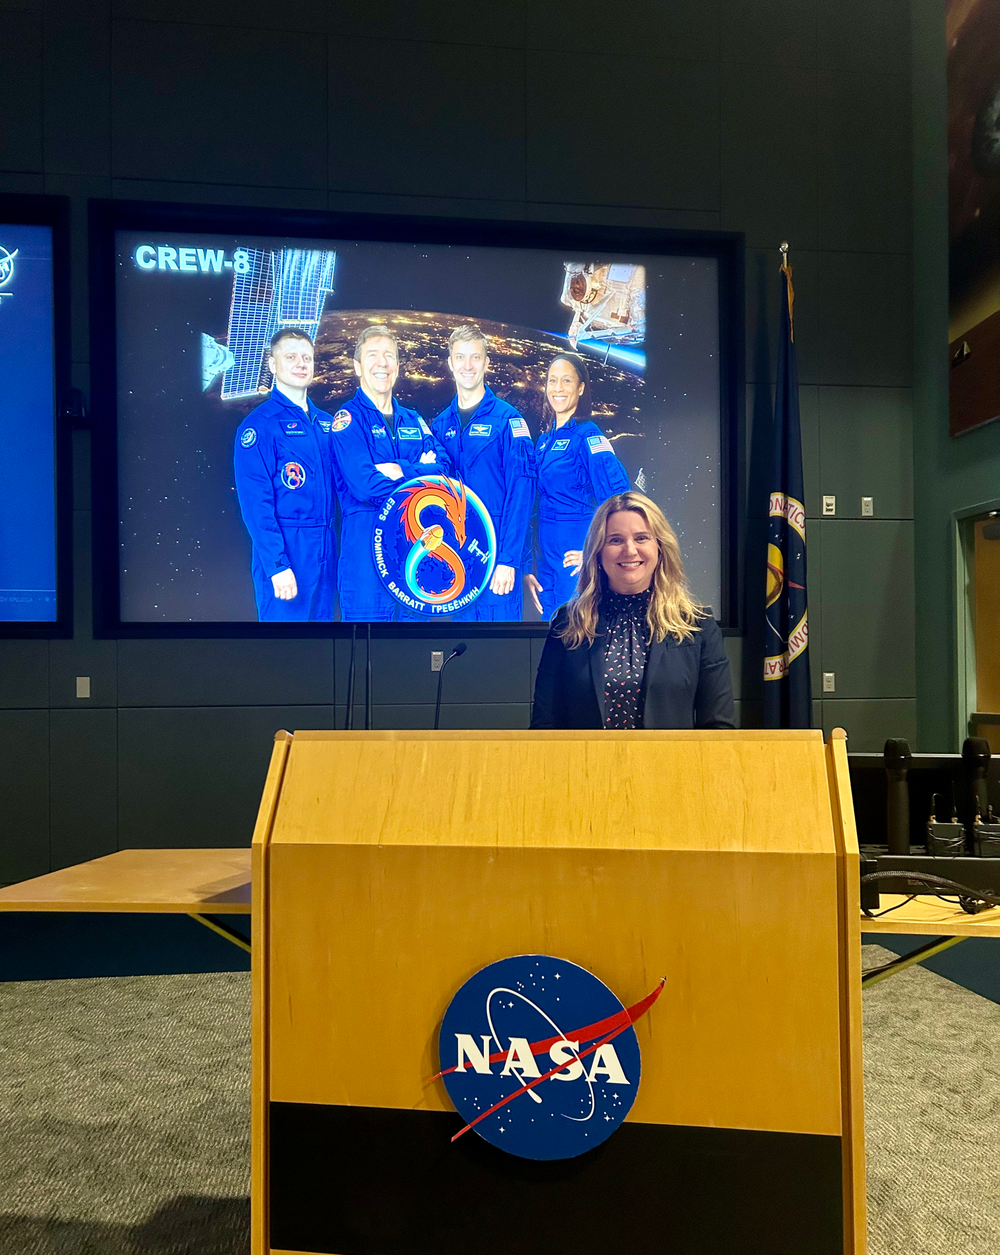 A woman stands behind a podium with a monitor screen and a NASA flag behind her.